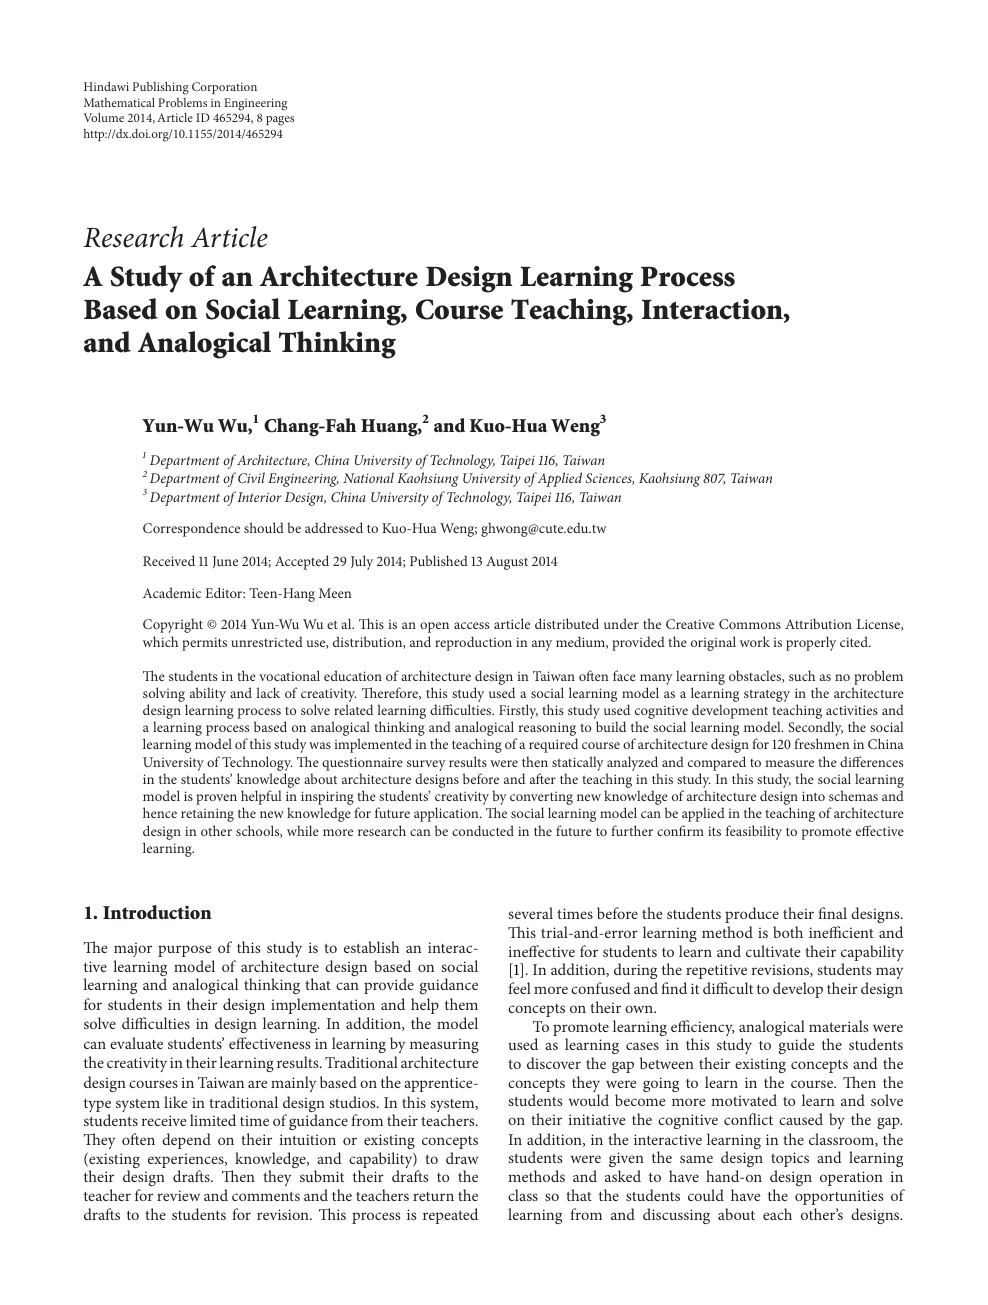 A Study Of An Architecture Design Learning Process Based On